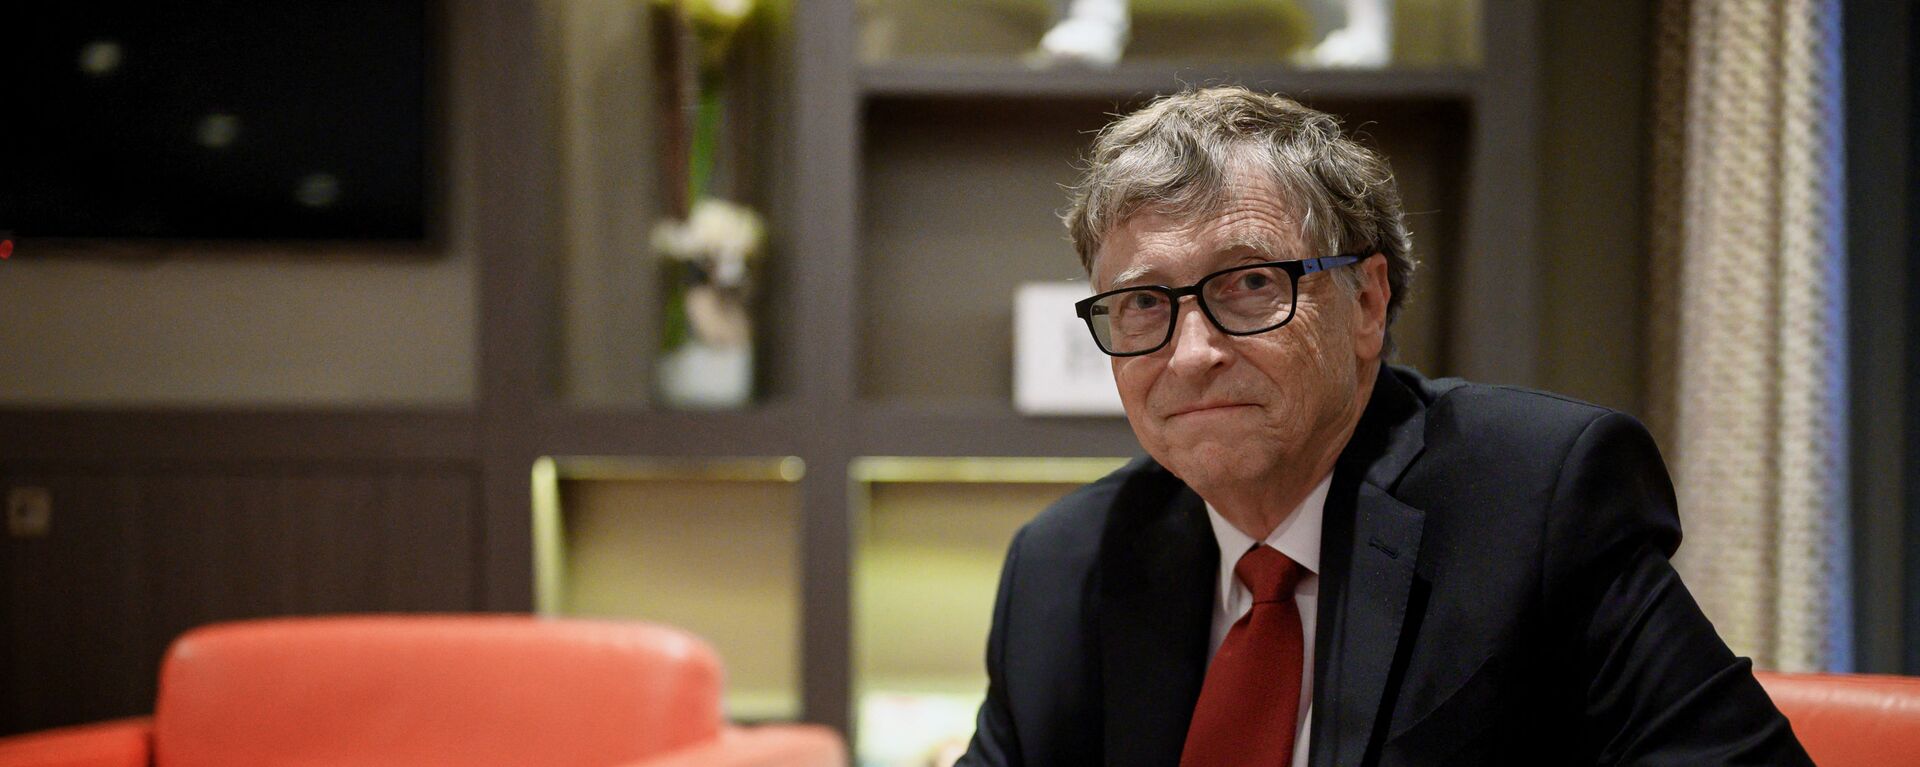 US Microsoft founder, Co-Chairman of the Bill & Melinda Gates Foundation, Bill Gates, poses for a picture on October 9, 2019, in Lyon, central eastern France, during the funding conference of Global Fund to Fight AIDS, Tuberculosis and Malaria.  - Sputnik International, 1920, 06.05.2021